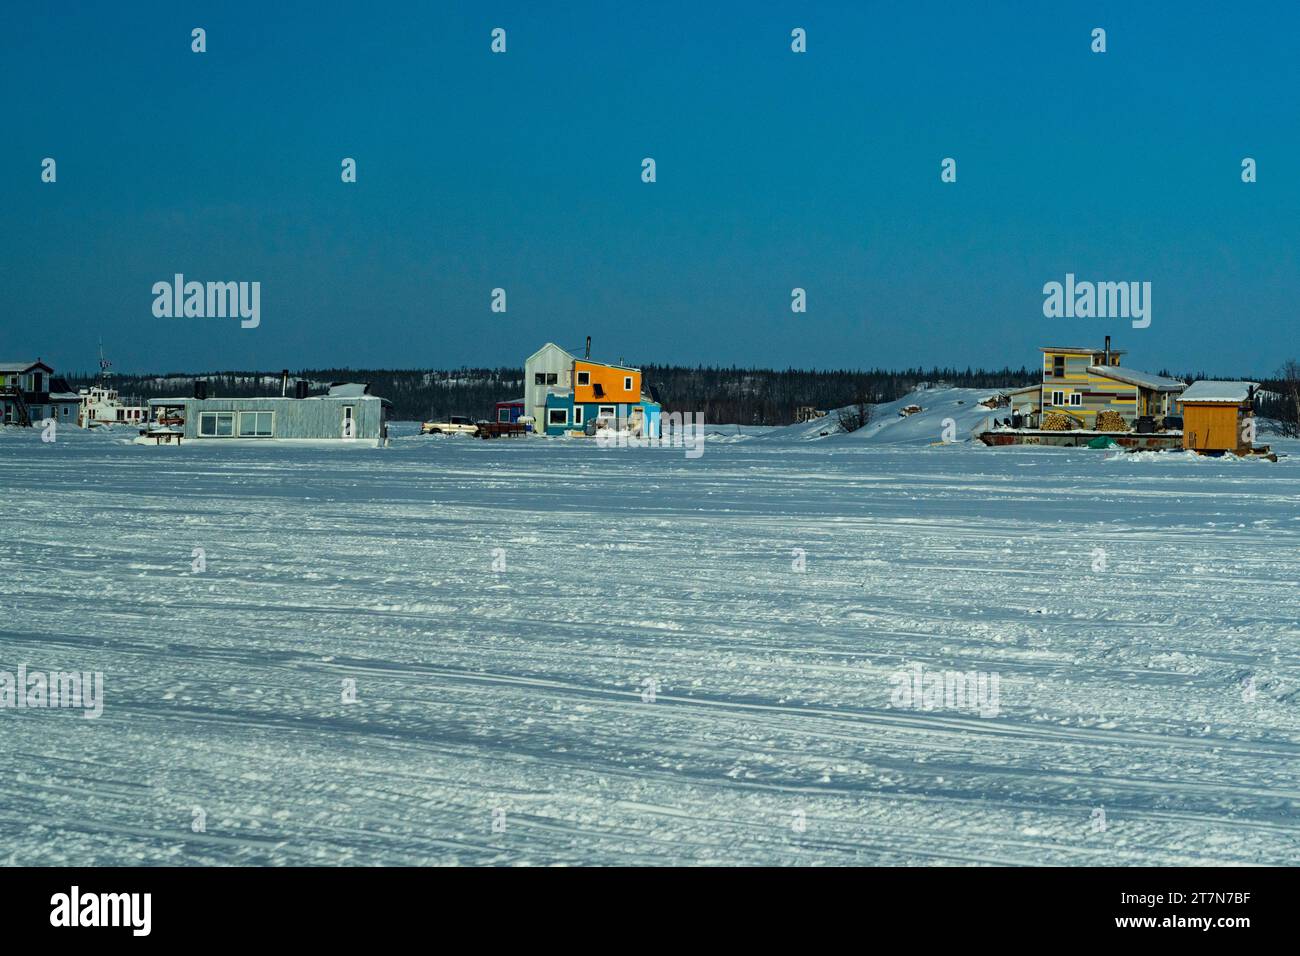 Overview of frozen Slave Lake with houseboats frozen on the ice where locals live year round accessing their homes by snowmobile or car in winter mont Stock Photo